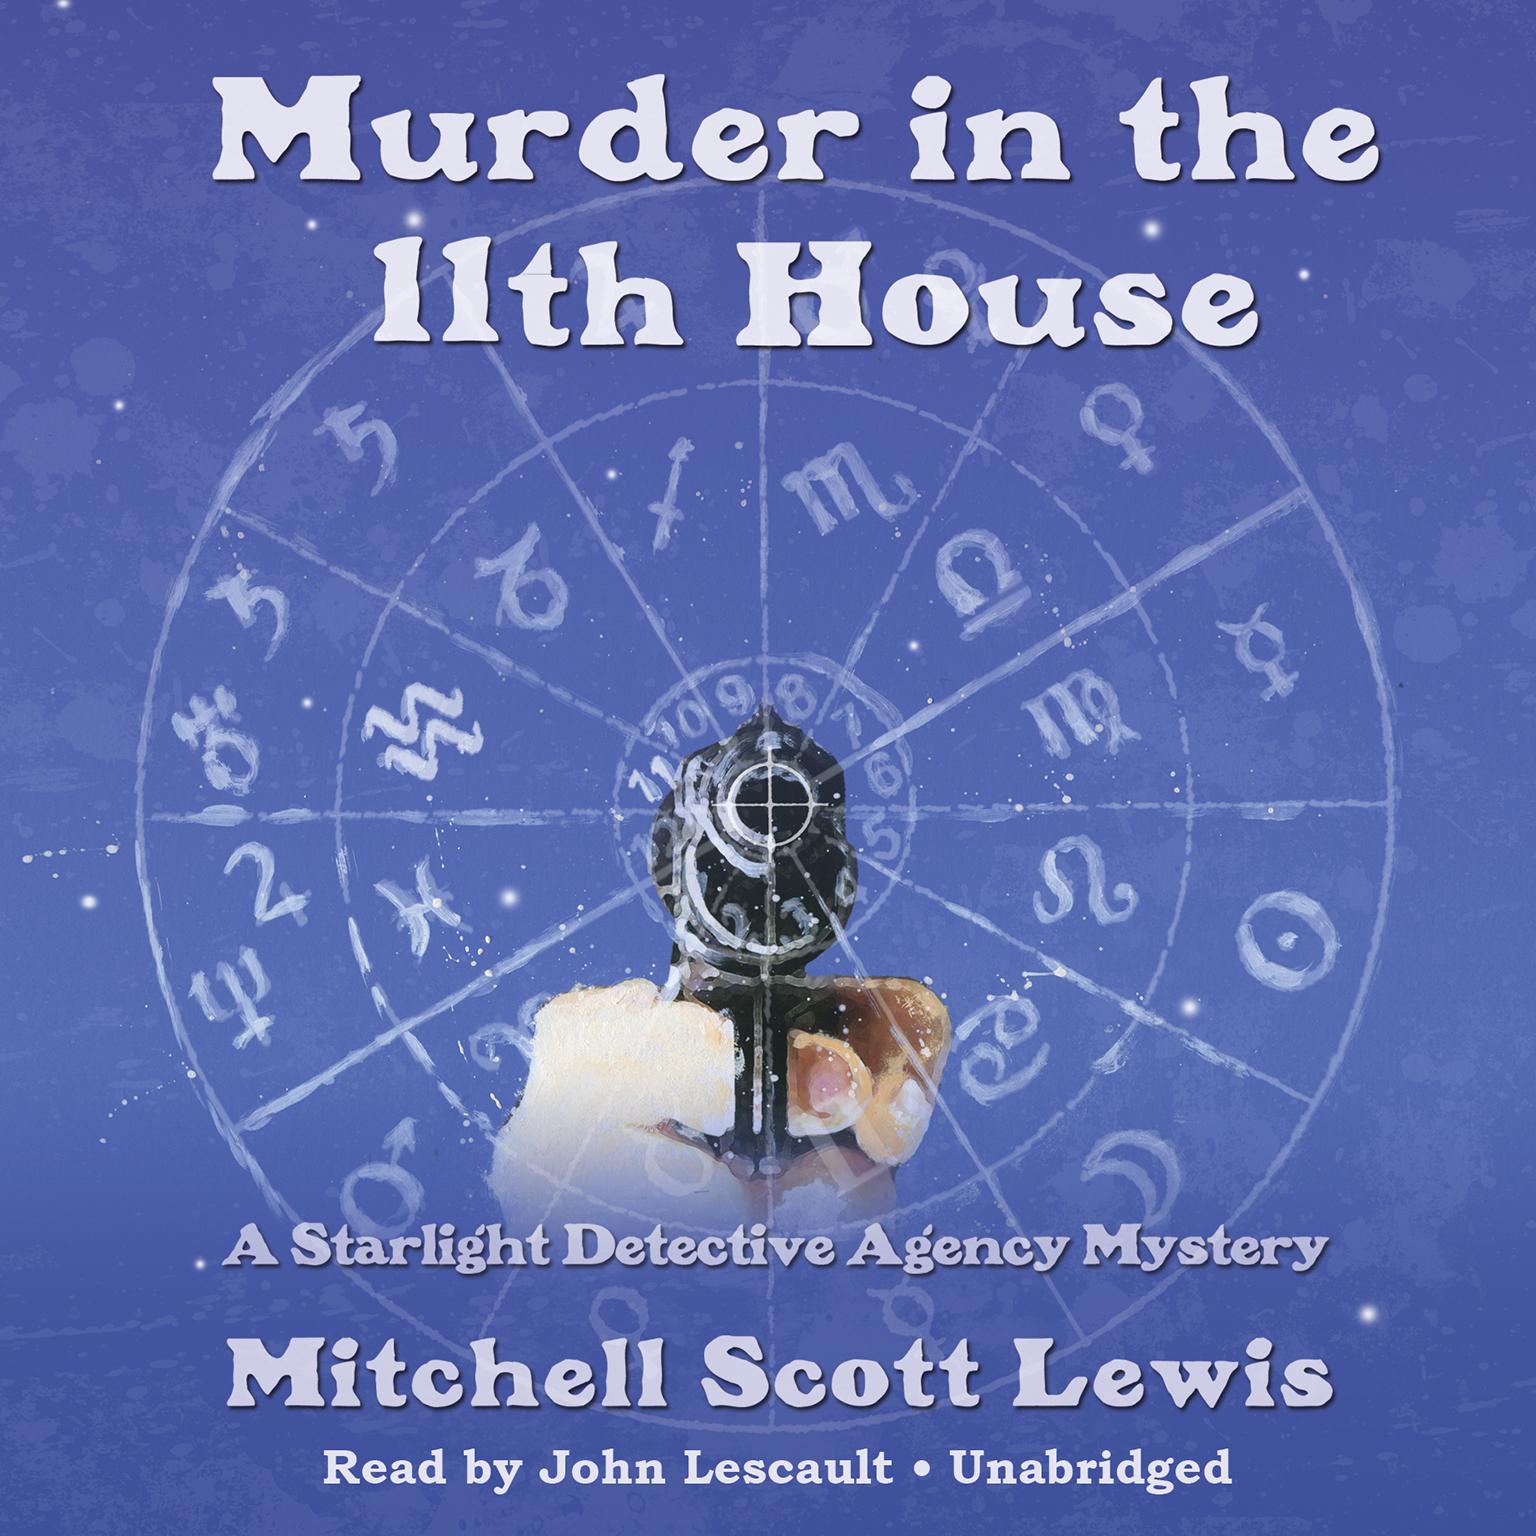 Murder in the 11th House: A Starlight Detective Agency Mystery Audiobook, by Mitchell Scott Lewis